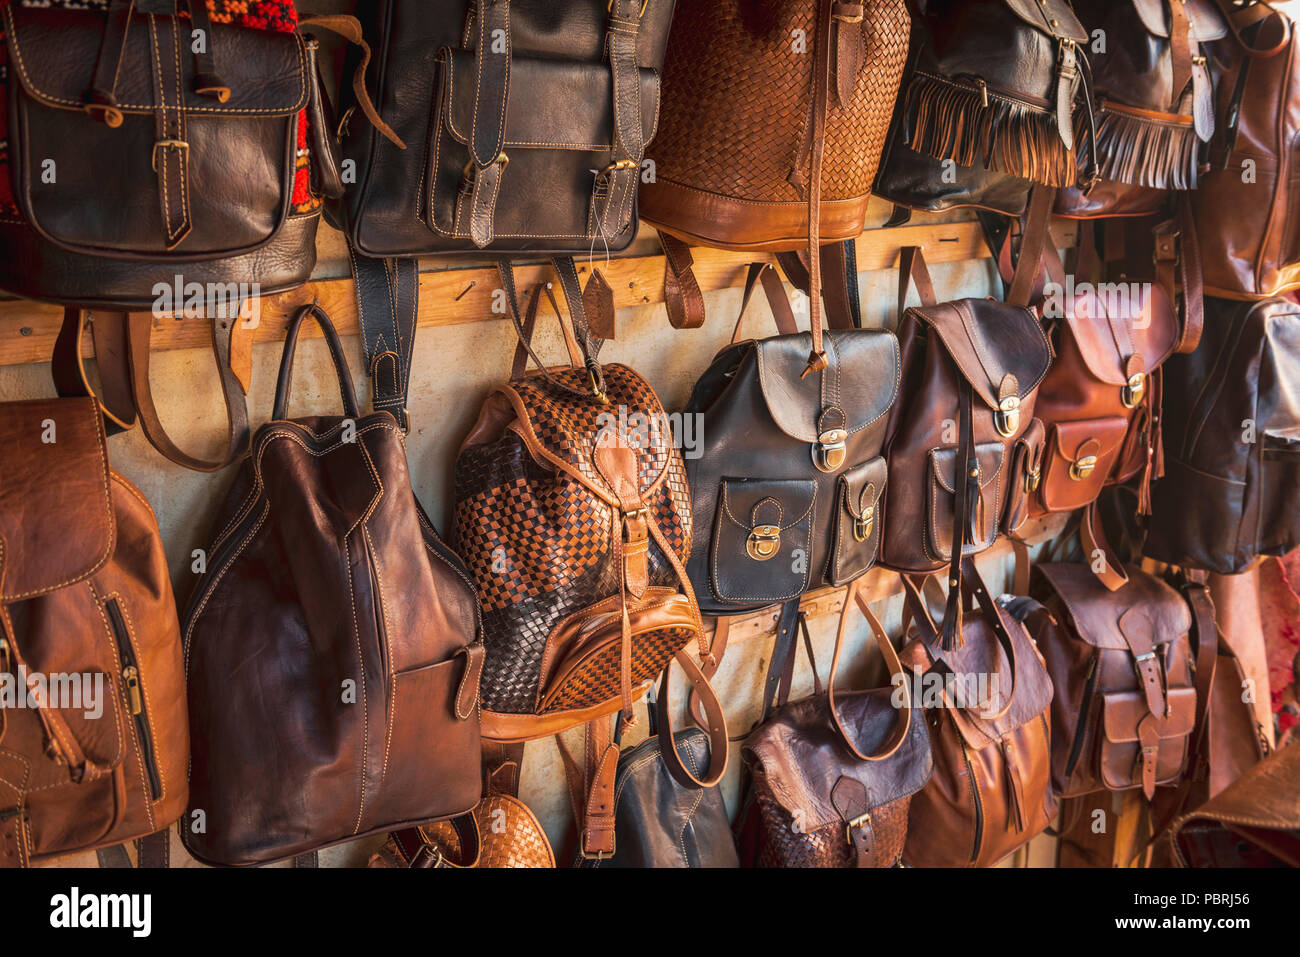 Leather Bags For Sale High Resolution Stock Photography and Images - Alamy